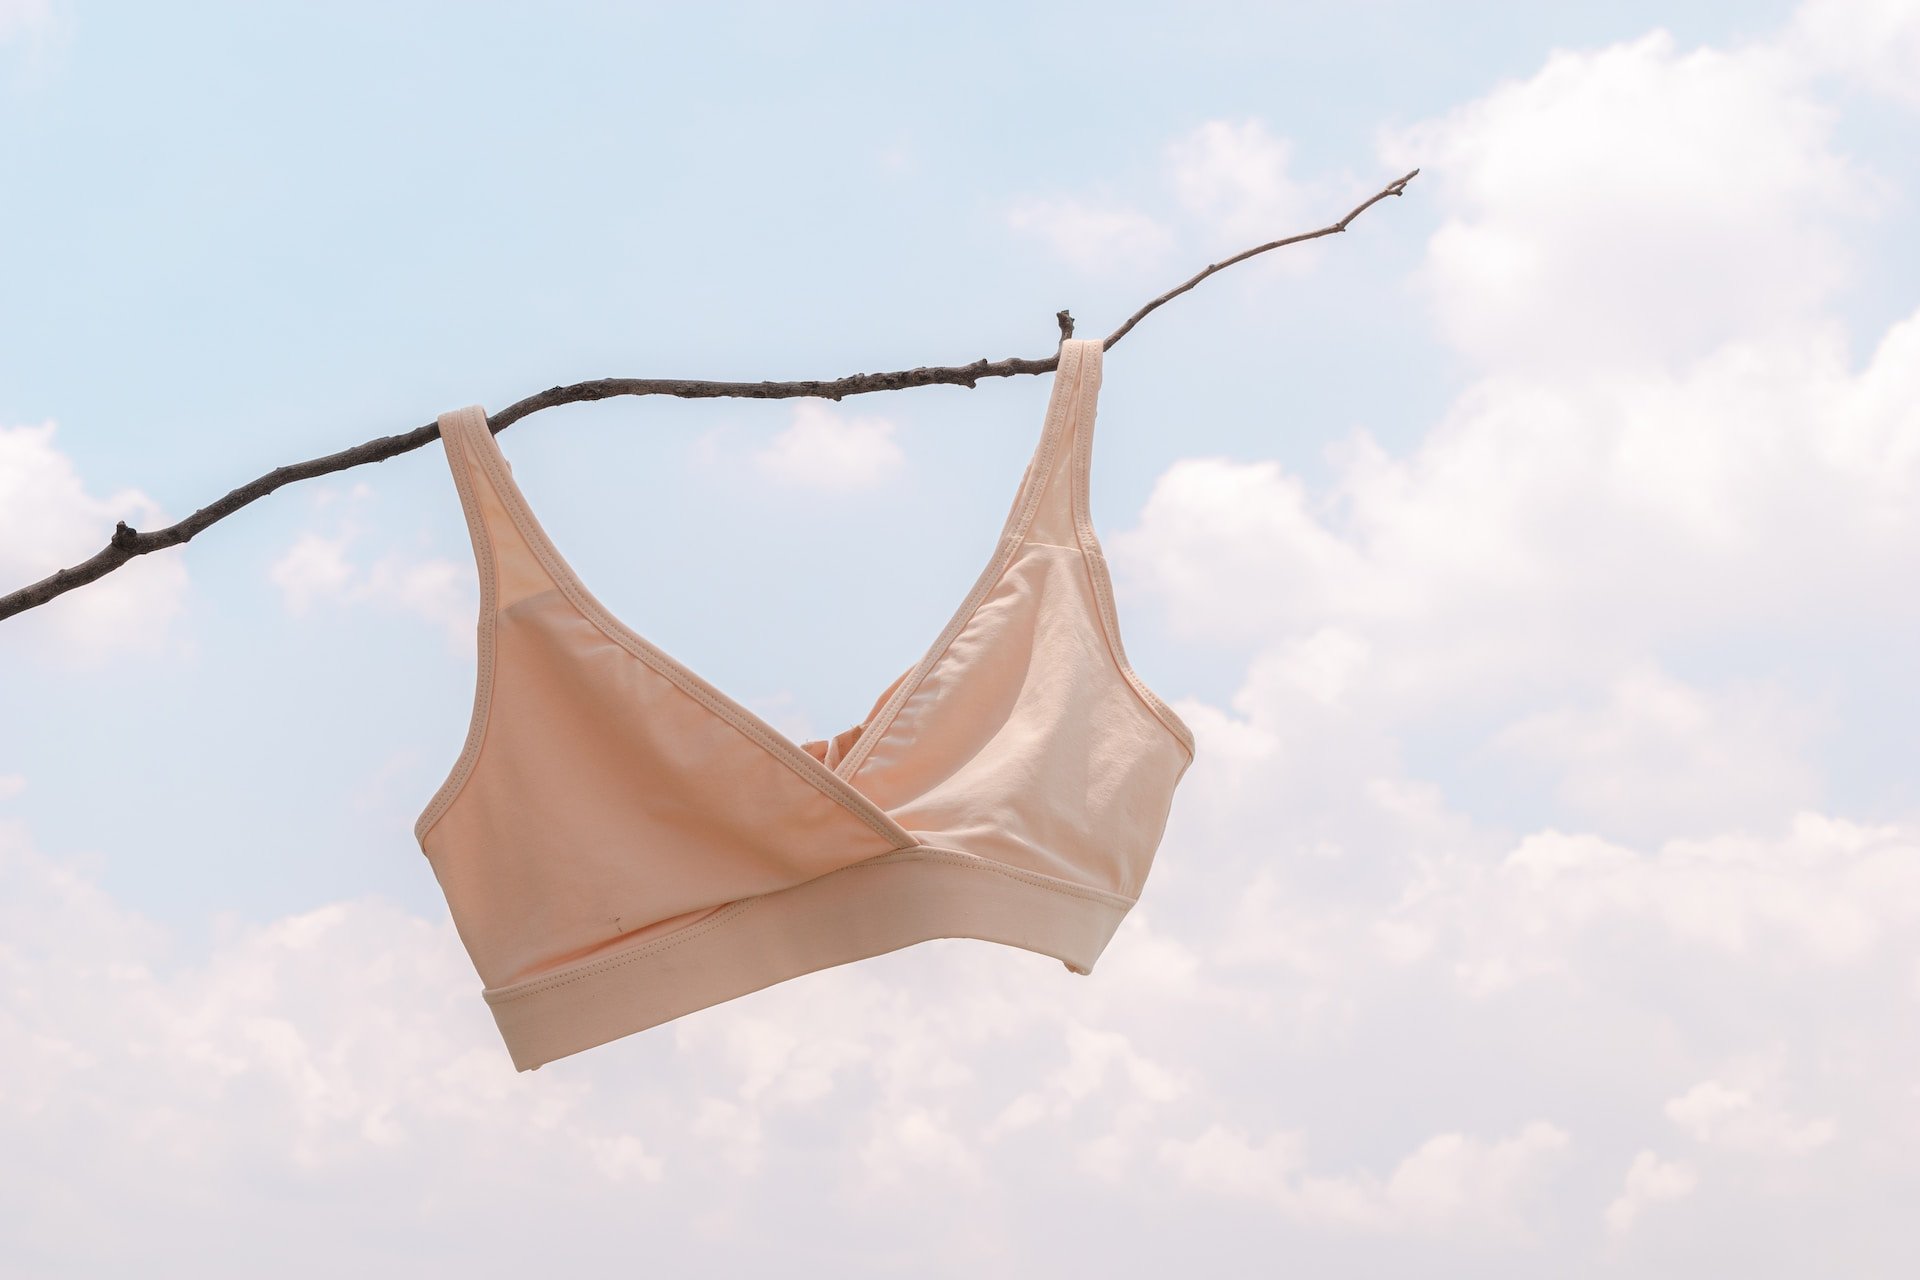 Reasons Why You Should Ditch Your Bra In Bed